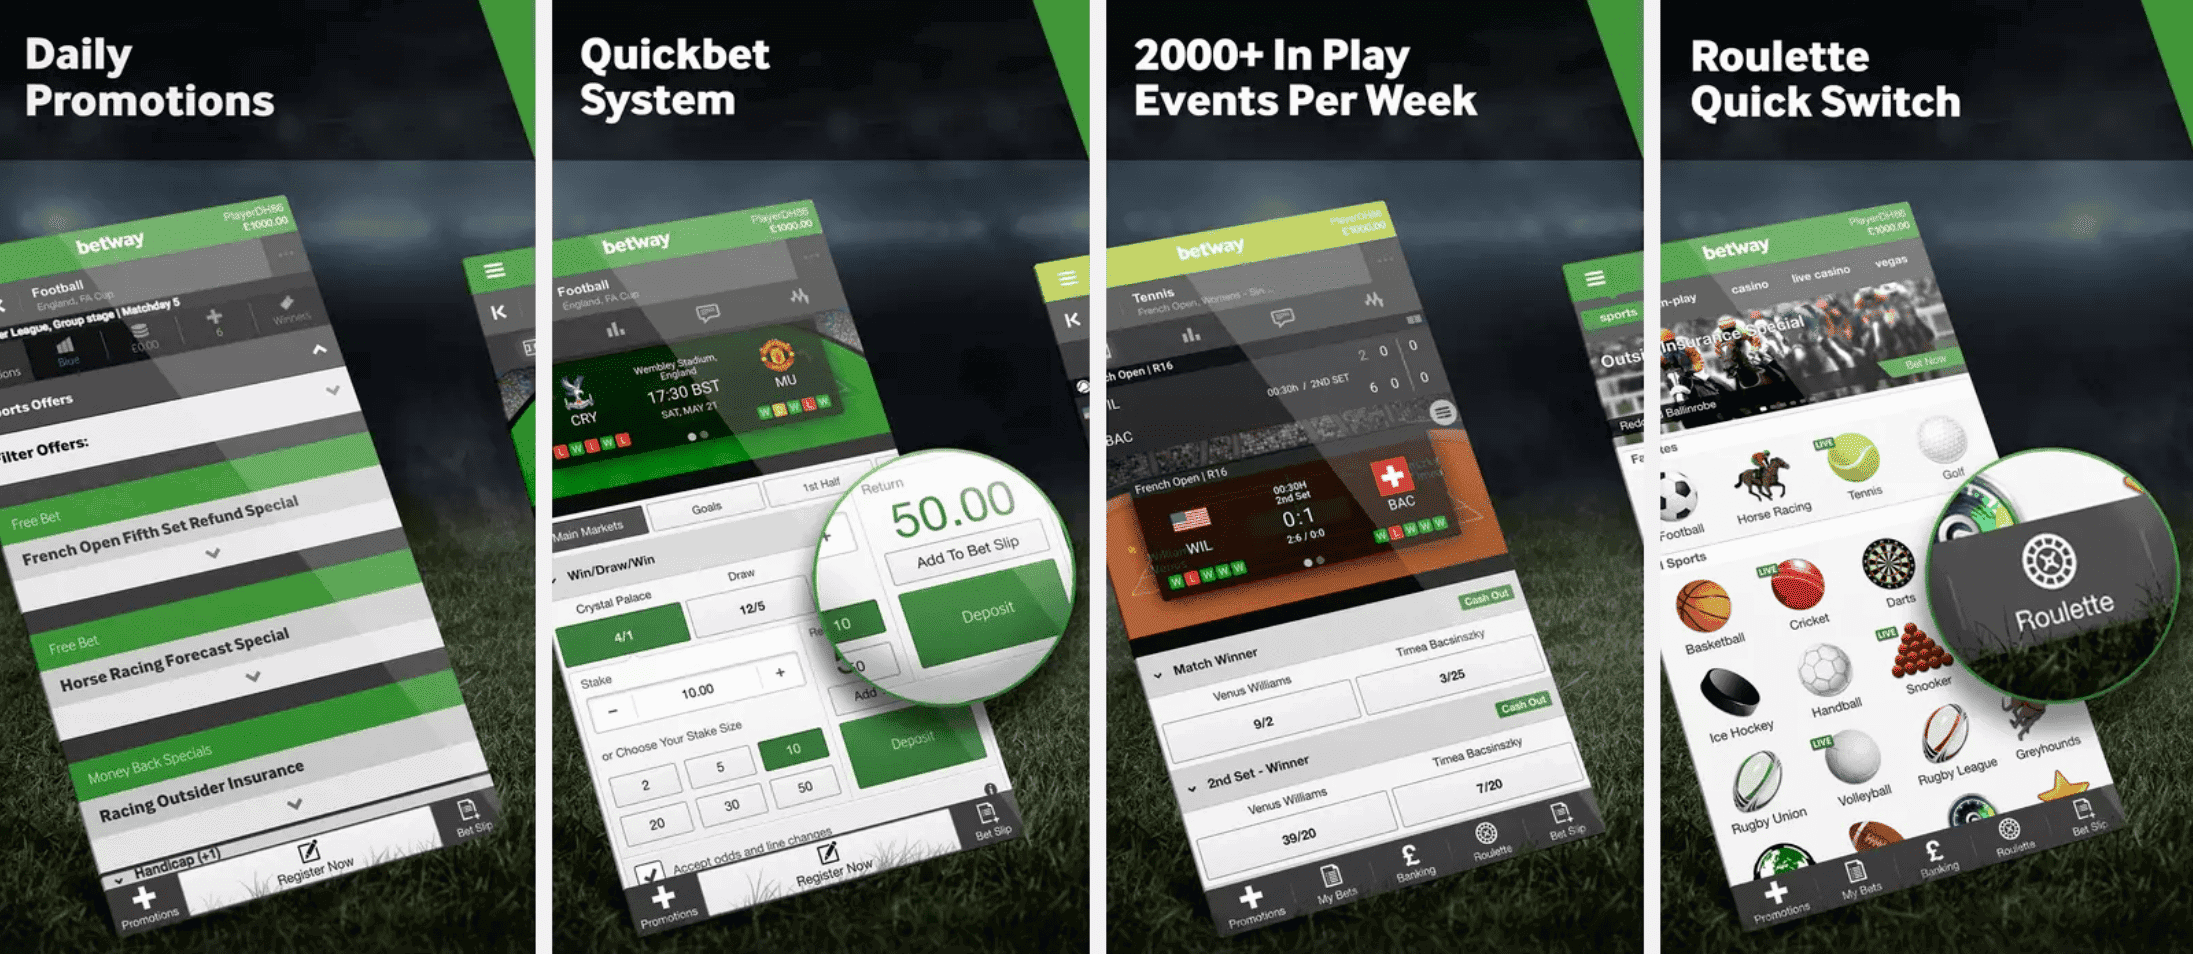 The Betway Mobile App features a sleek and responsive interface with direct access to Daily Promotions, a Quickbet System, Roulette Quick Switch, 2000+ weekly sporting events and more.